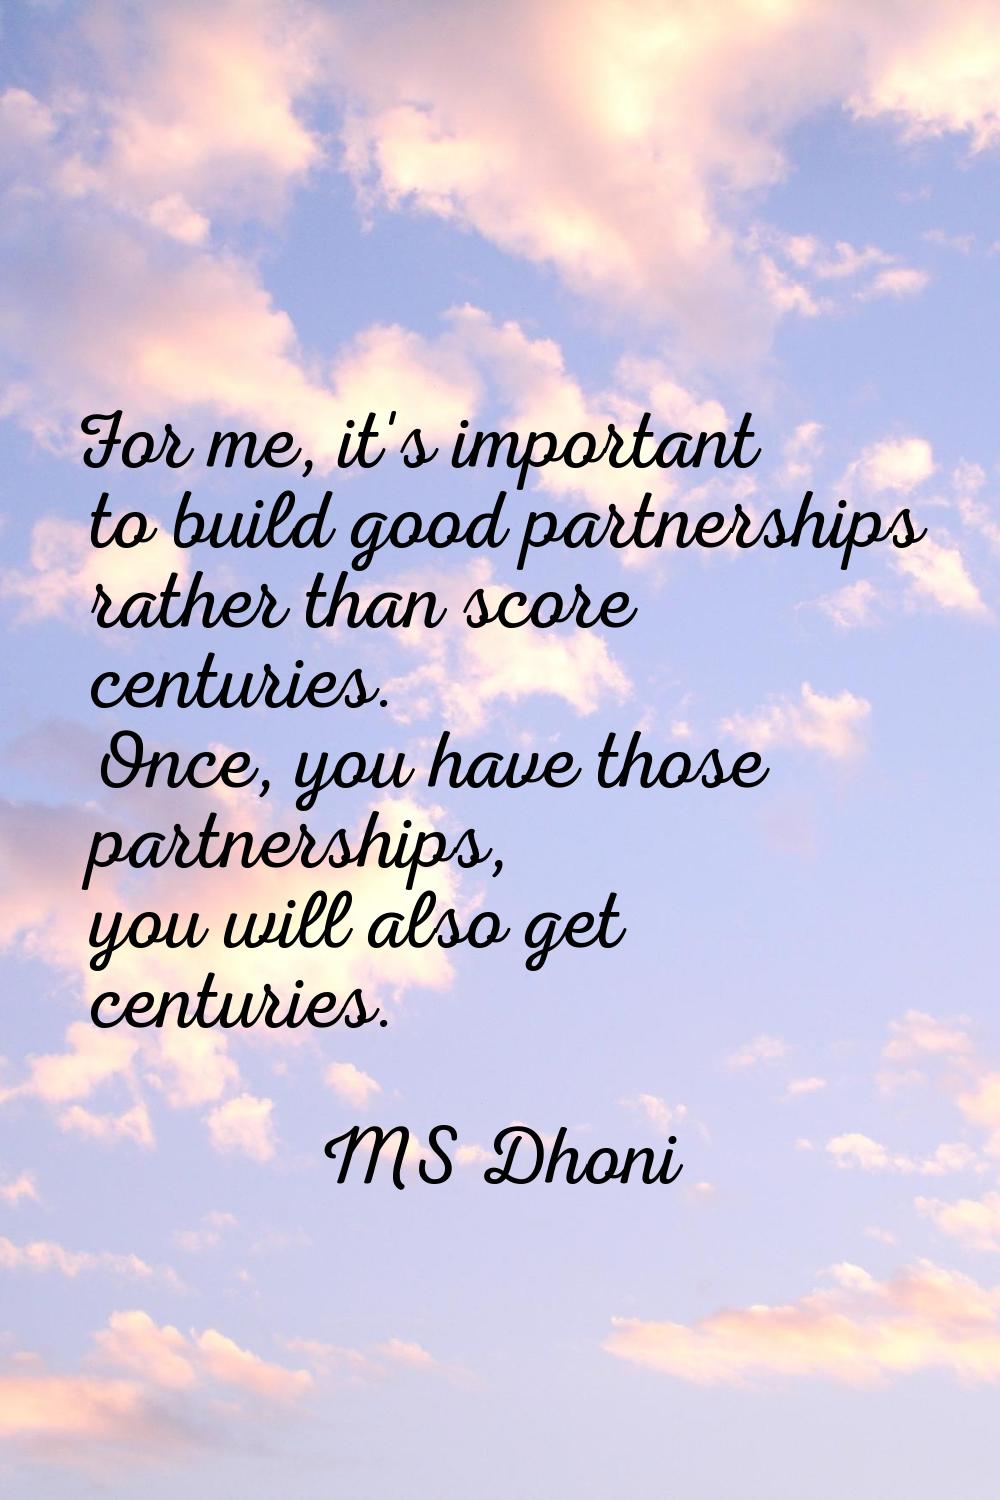 For me, it's important to build good partnerships rather than score centuries. Once, you have those